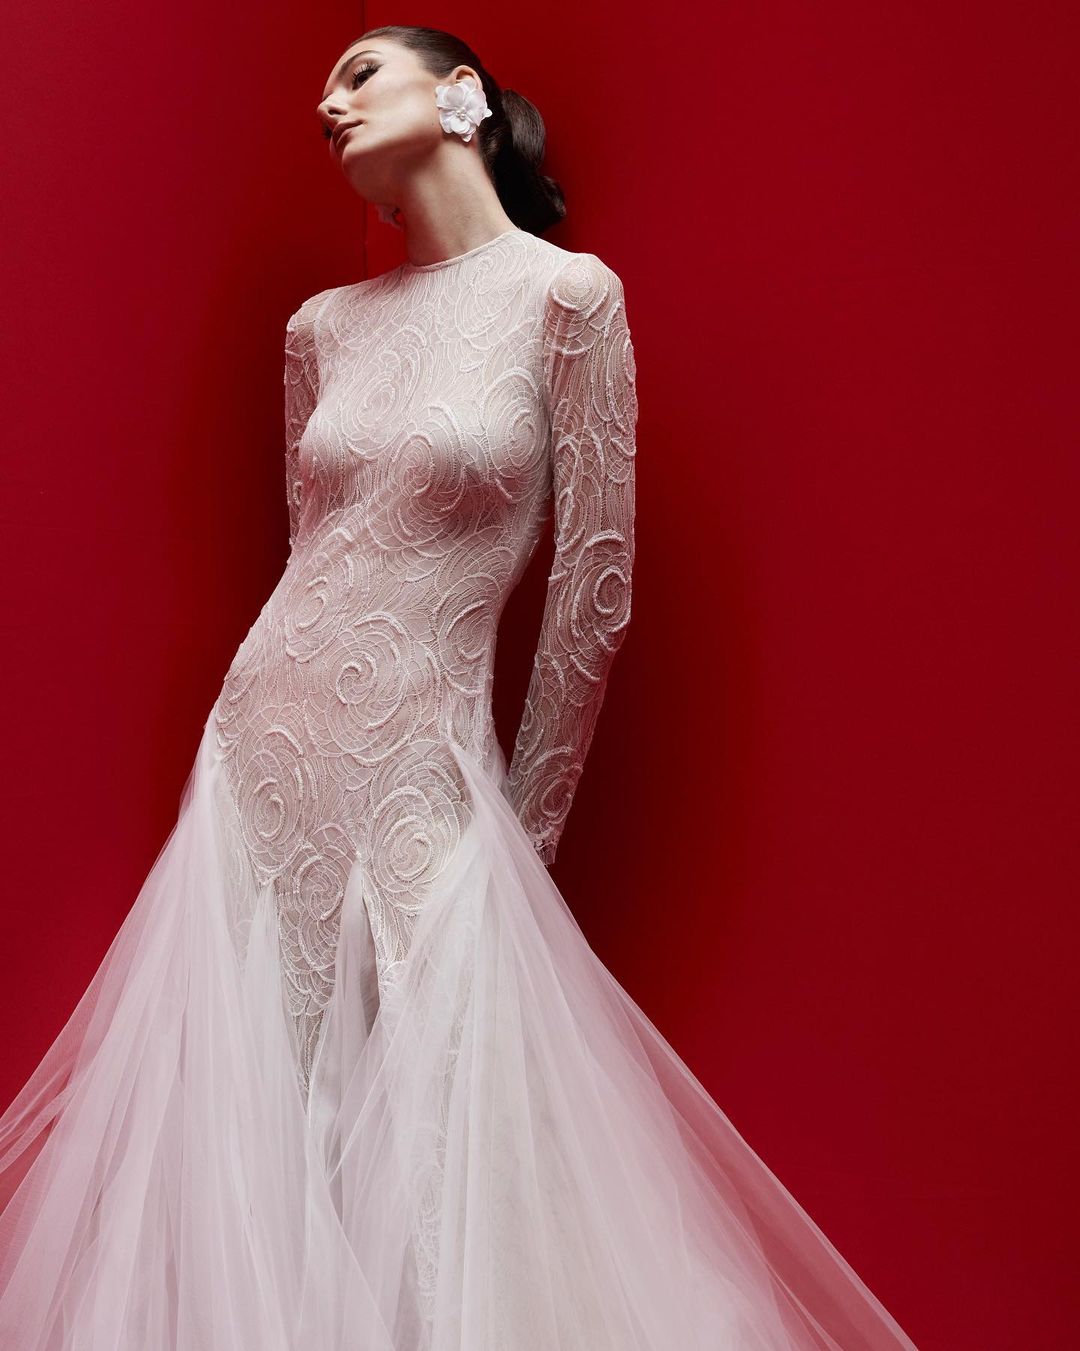 A gown with a rose motif made with French lace and tulle